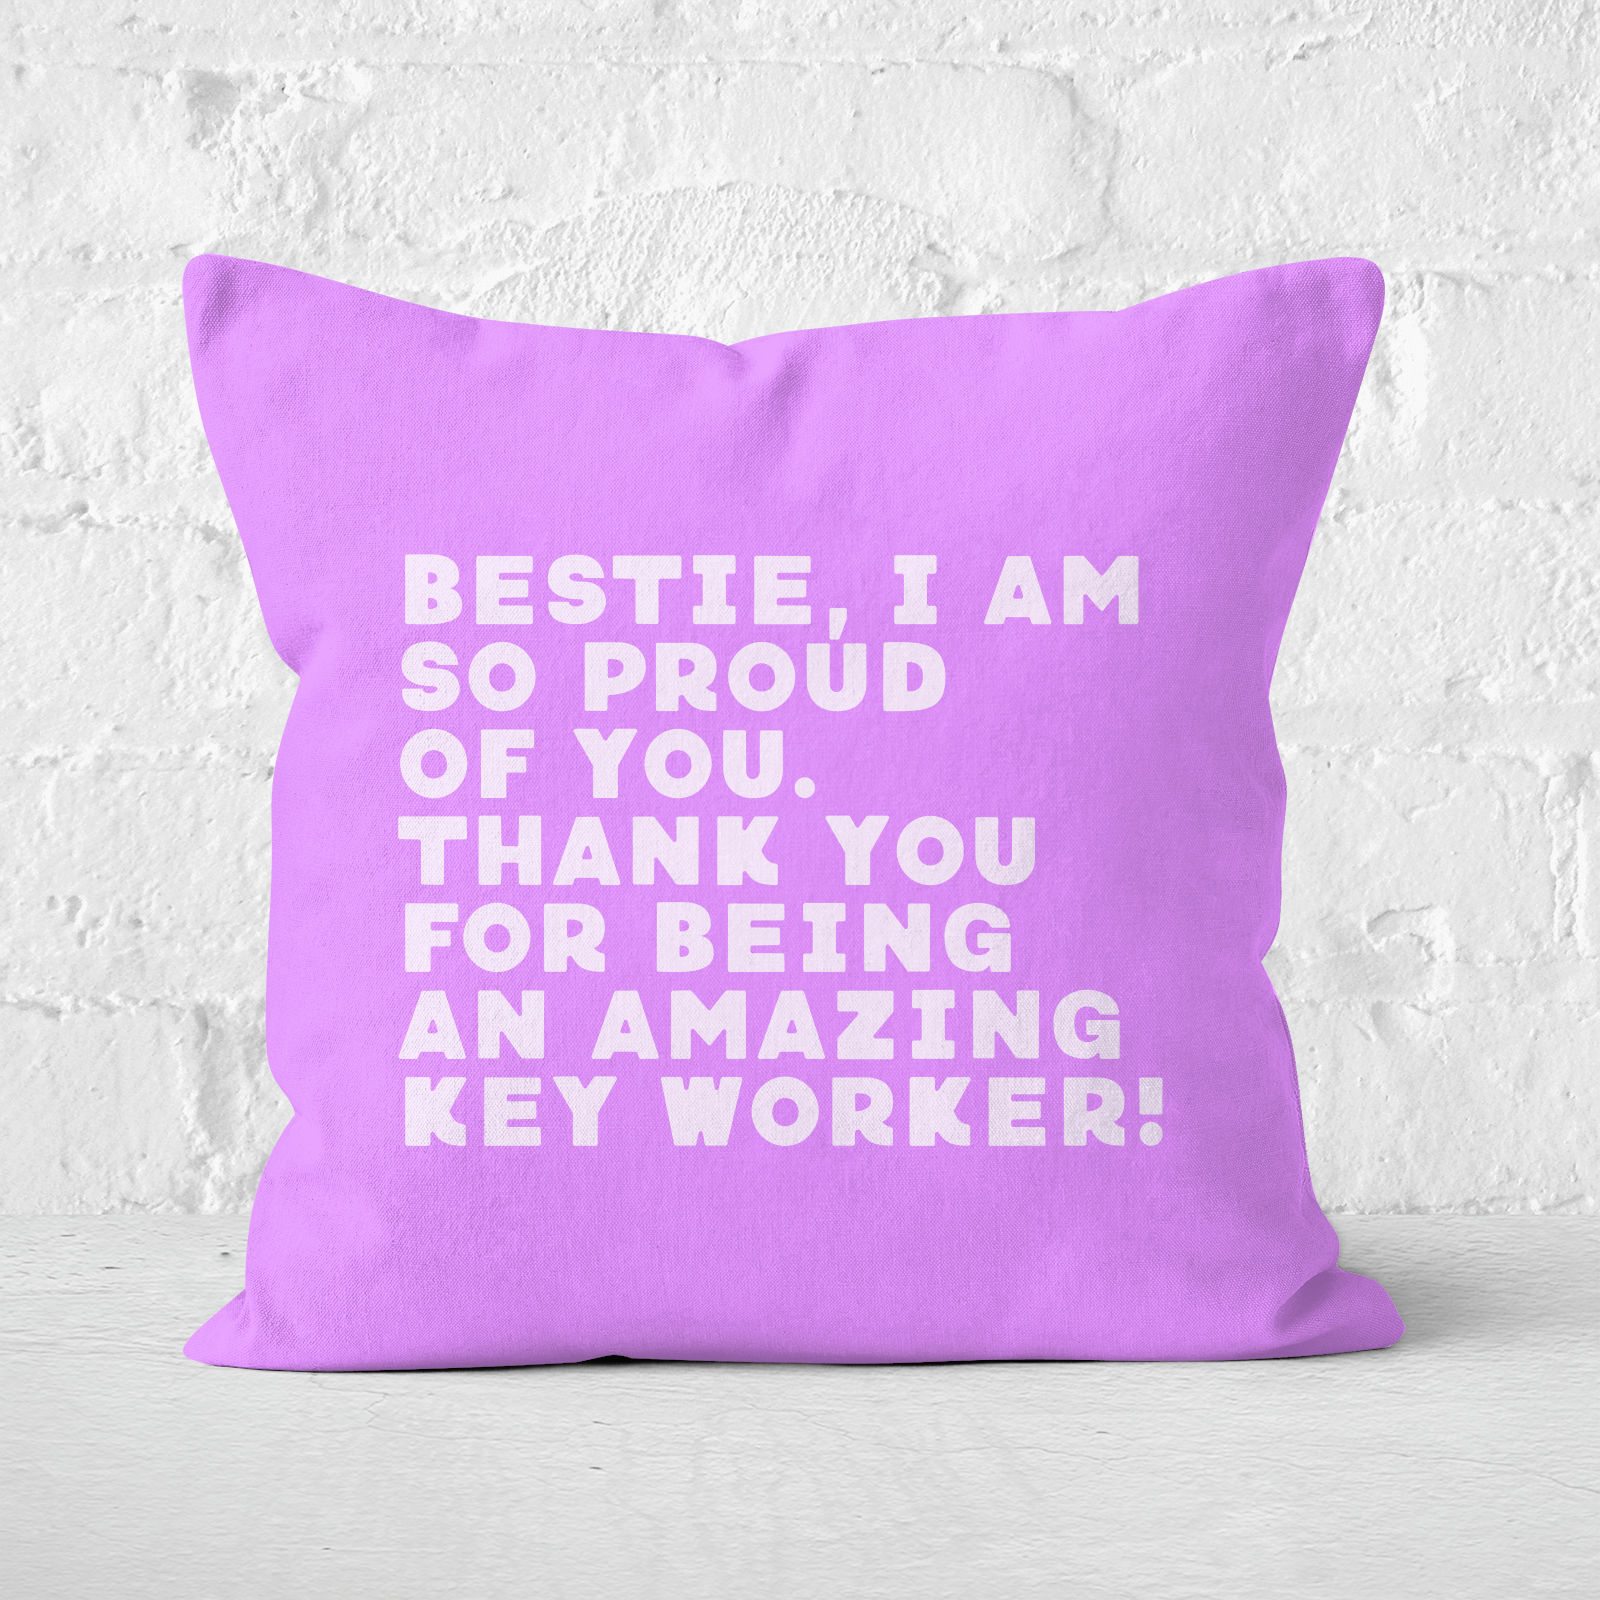 Bestie, I Am So Proud Of You Square Cushion - 60x60cm - Soft Touch